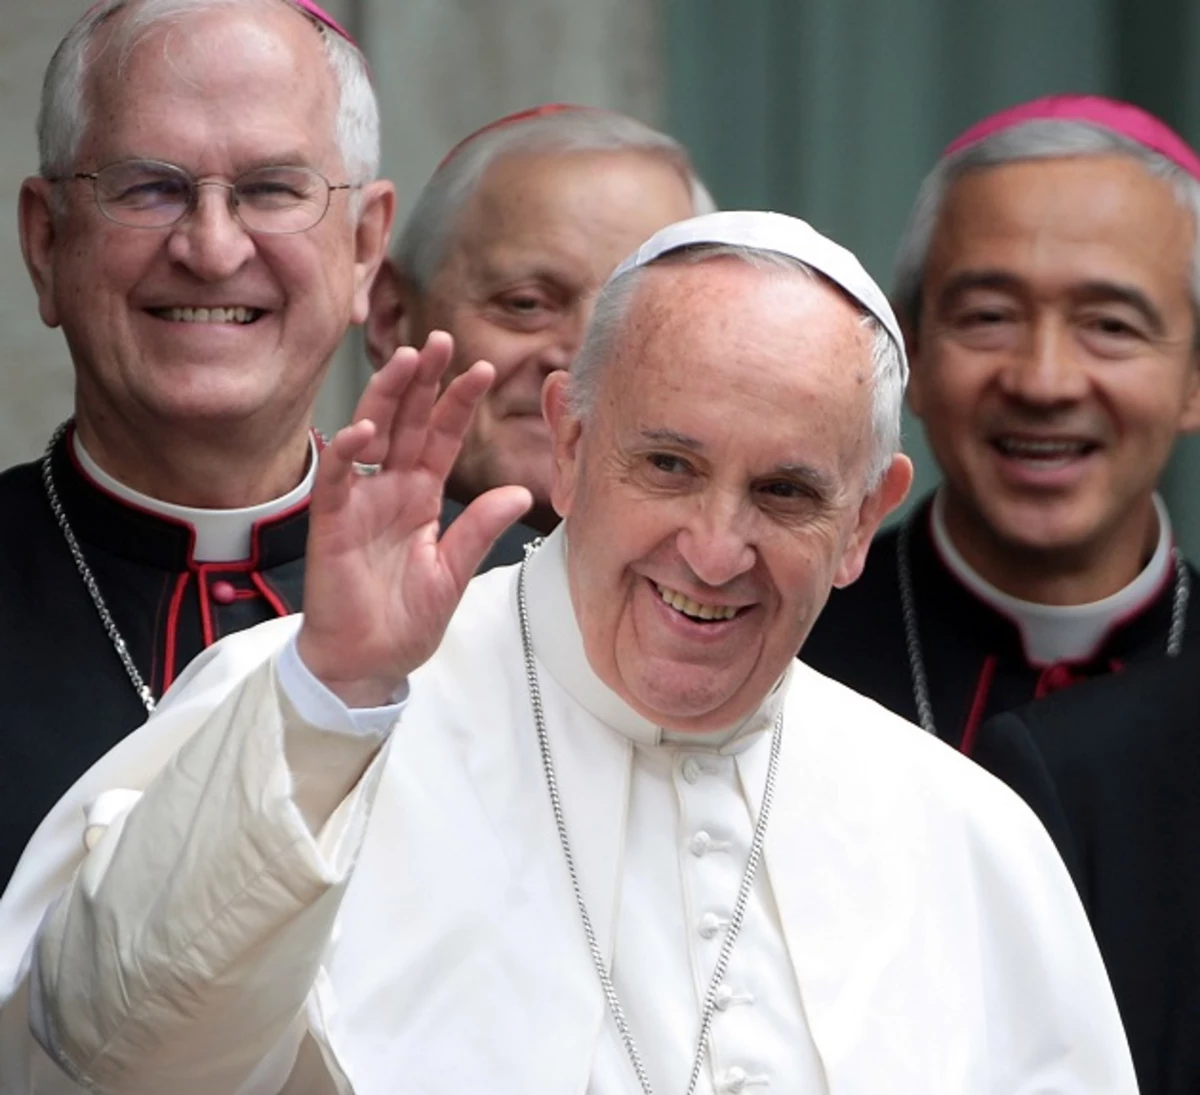 Will The Pope Say Nope To Dope? Not on this visit